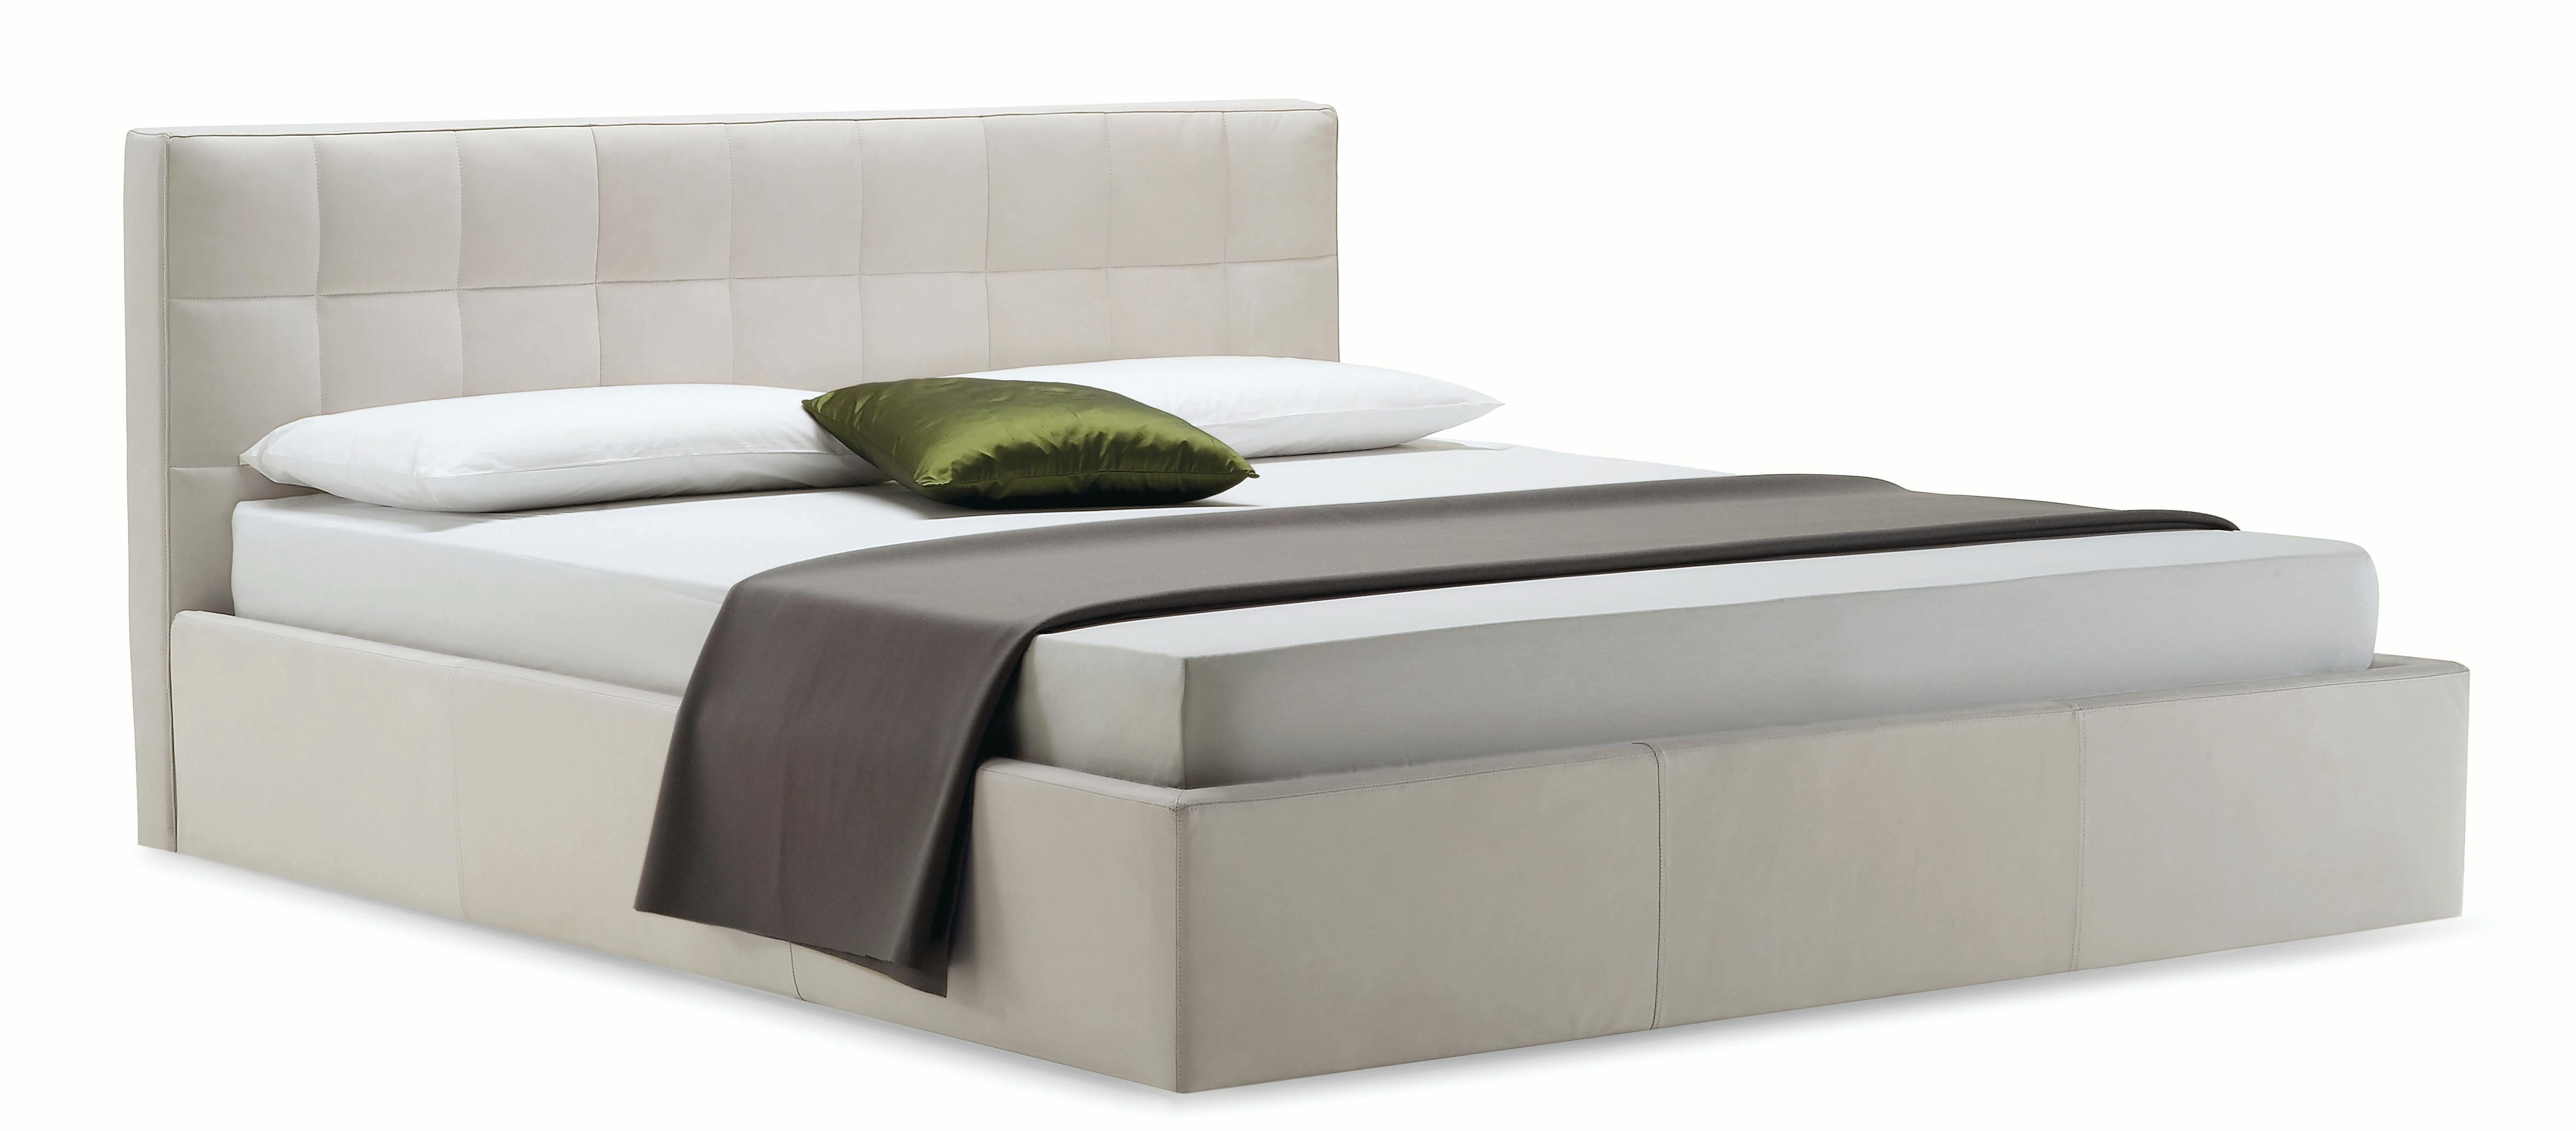 Zanotta King Size Box Bed with Container Unit in White Upholstery & Steel Frame by Emaf Progetti

Bed with container unit. Steel frame, varnished aluminium. Suspension in natural bent beech strips, with stiffness adjusters, inserted in nylon joints.